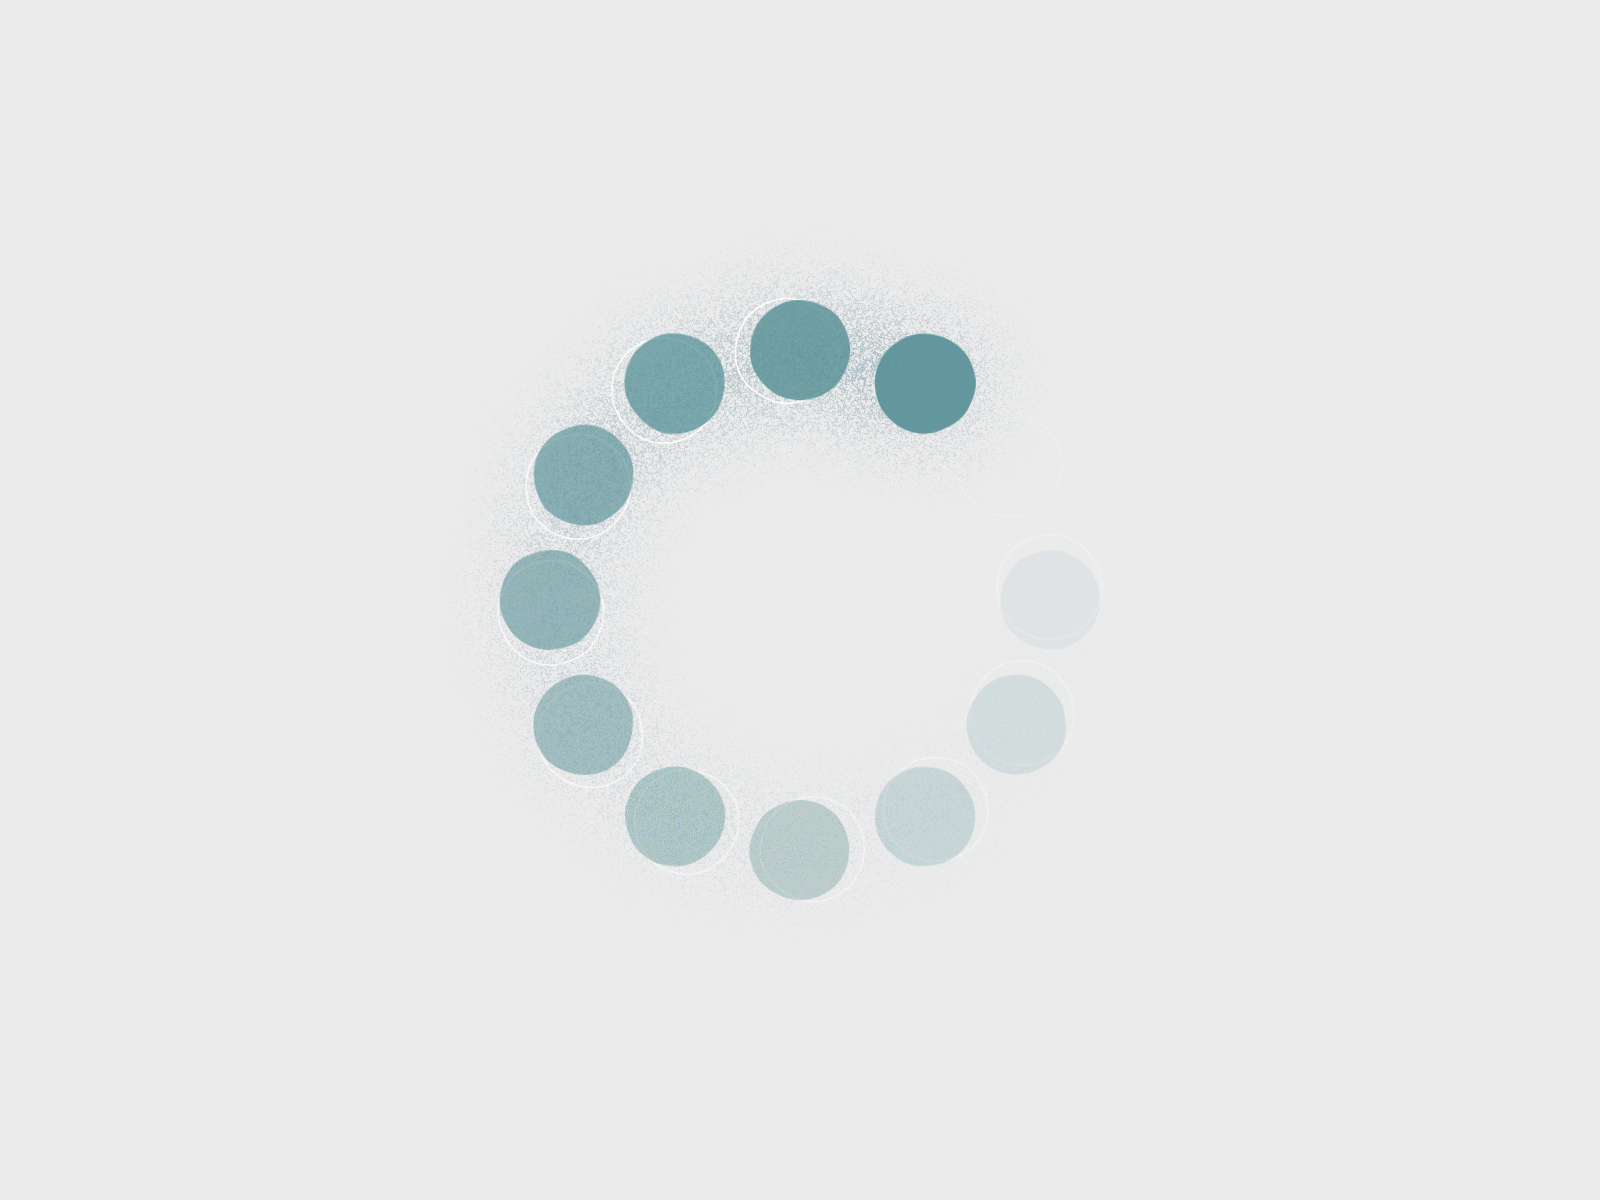 Circle Loading Animation by Anton Zuienko on Dribbble